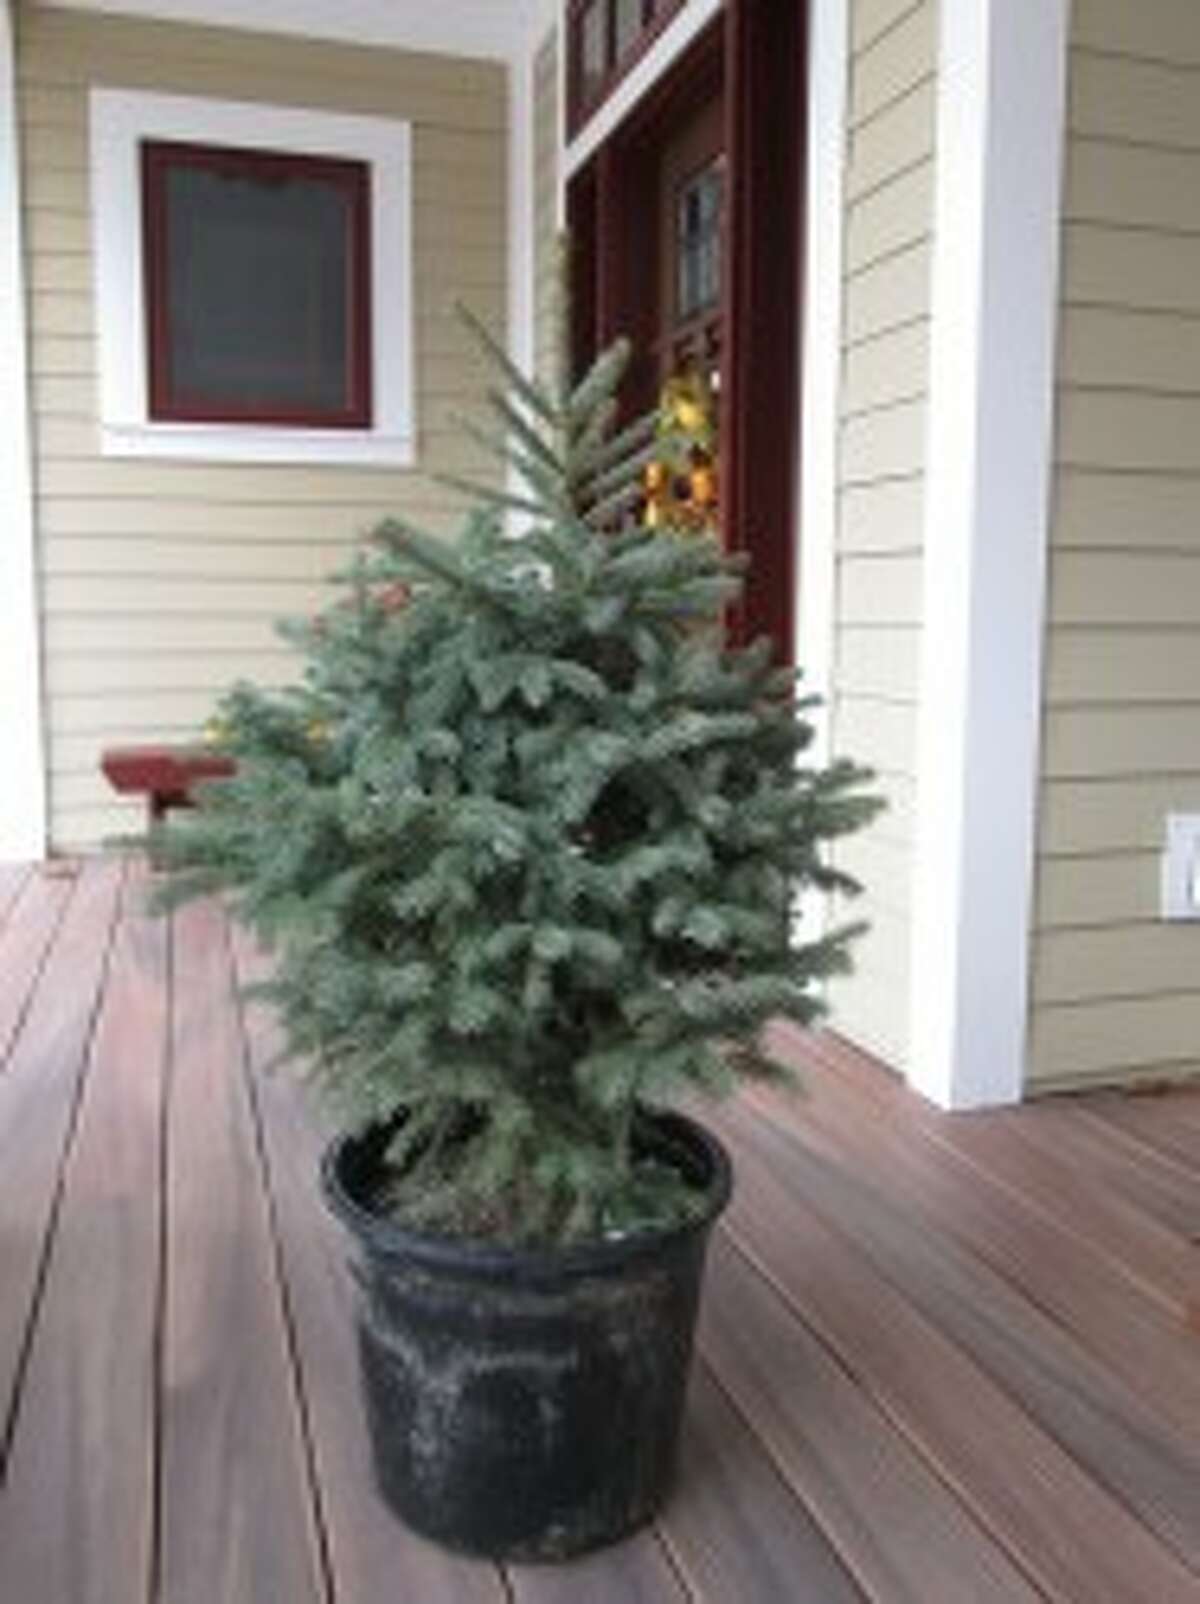 At Christmas in Onekama this weekend, 23 potted Black Hills spruce trees will be sold by bid. (Courtesy Photo)